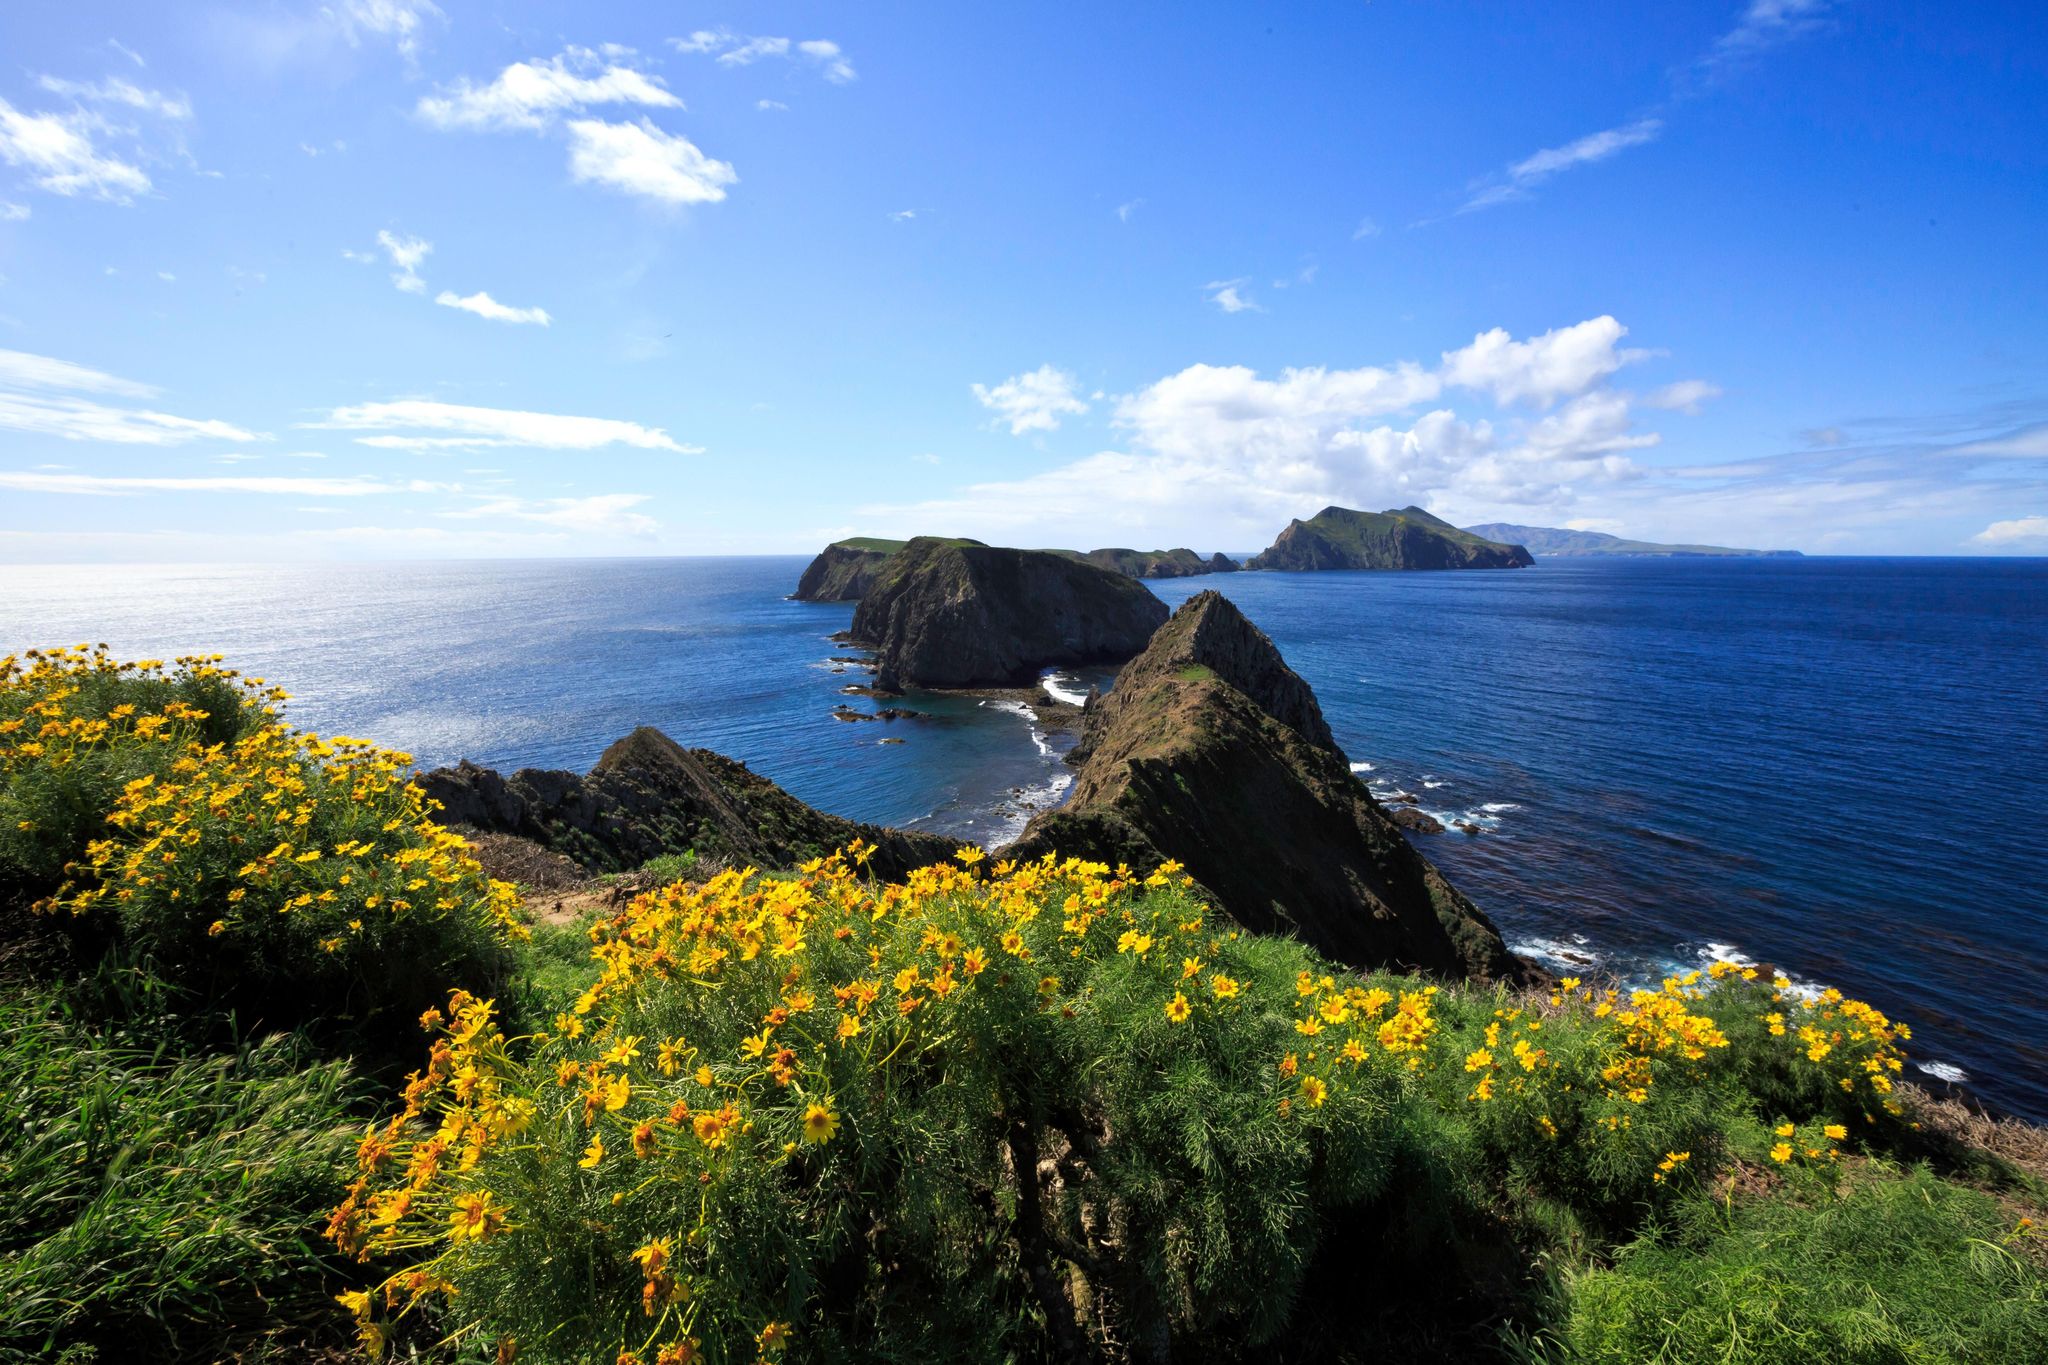 Inspiration Point, Anacapa Island: One of the most spectacular views in the park can be found from Inspiration Point. Looking to the west, one may see Middle and West Anacapa, with Santa Cruz Island in the distance.